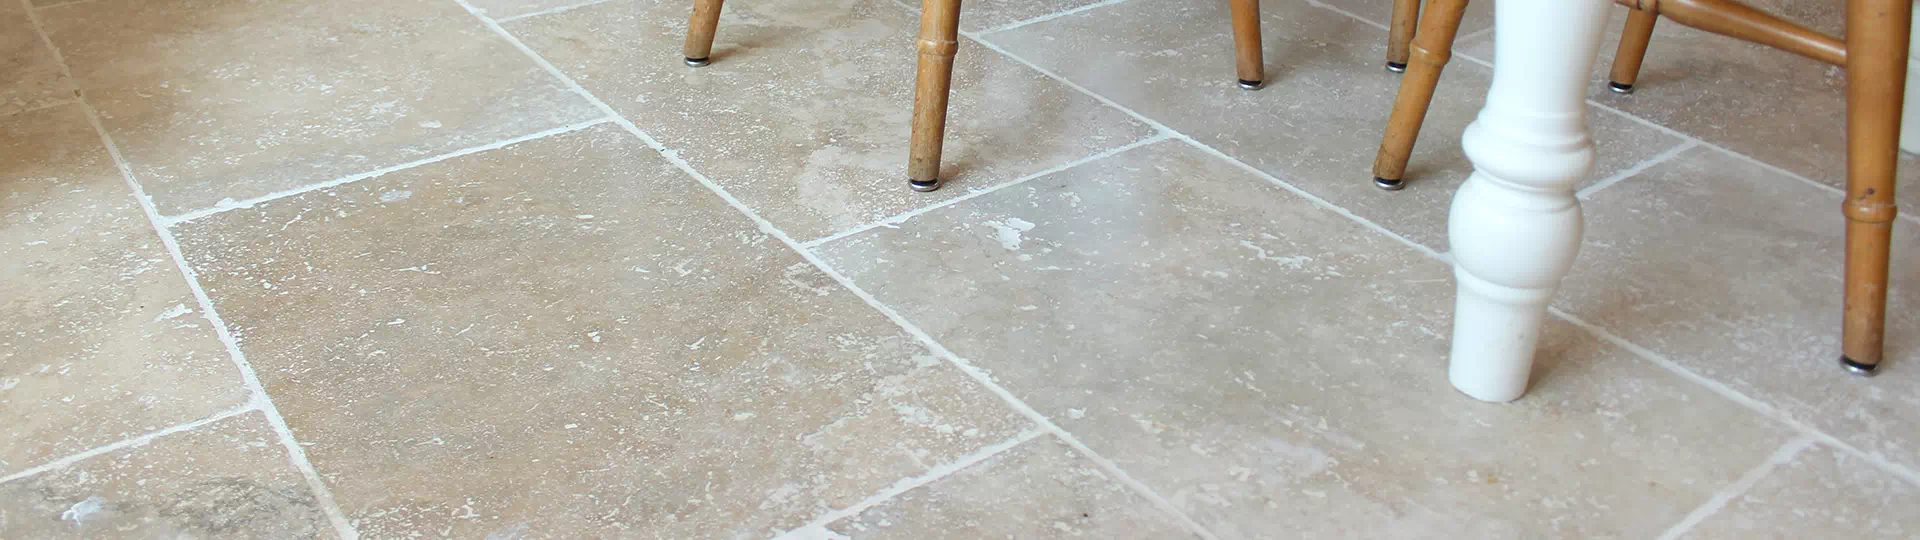 How To Clean Travertine Floors Simple, How To Clean Stone Tile Floors